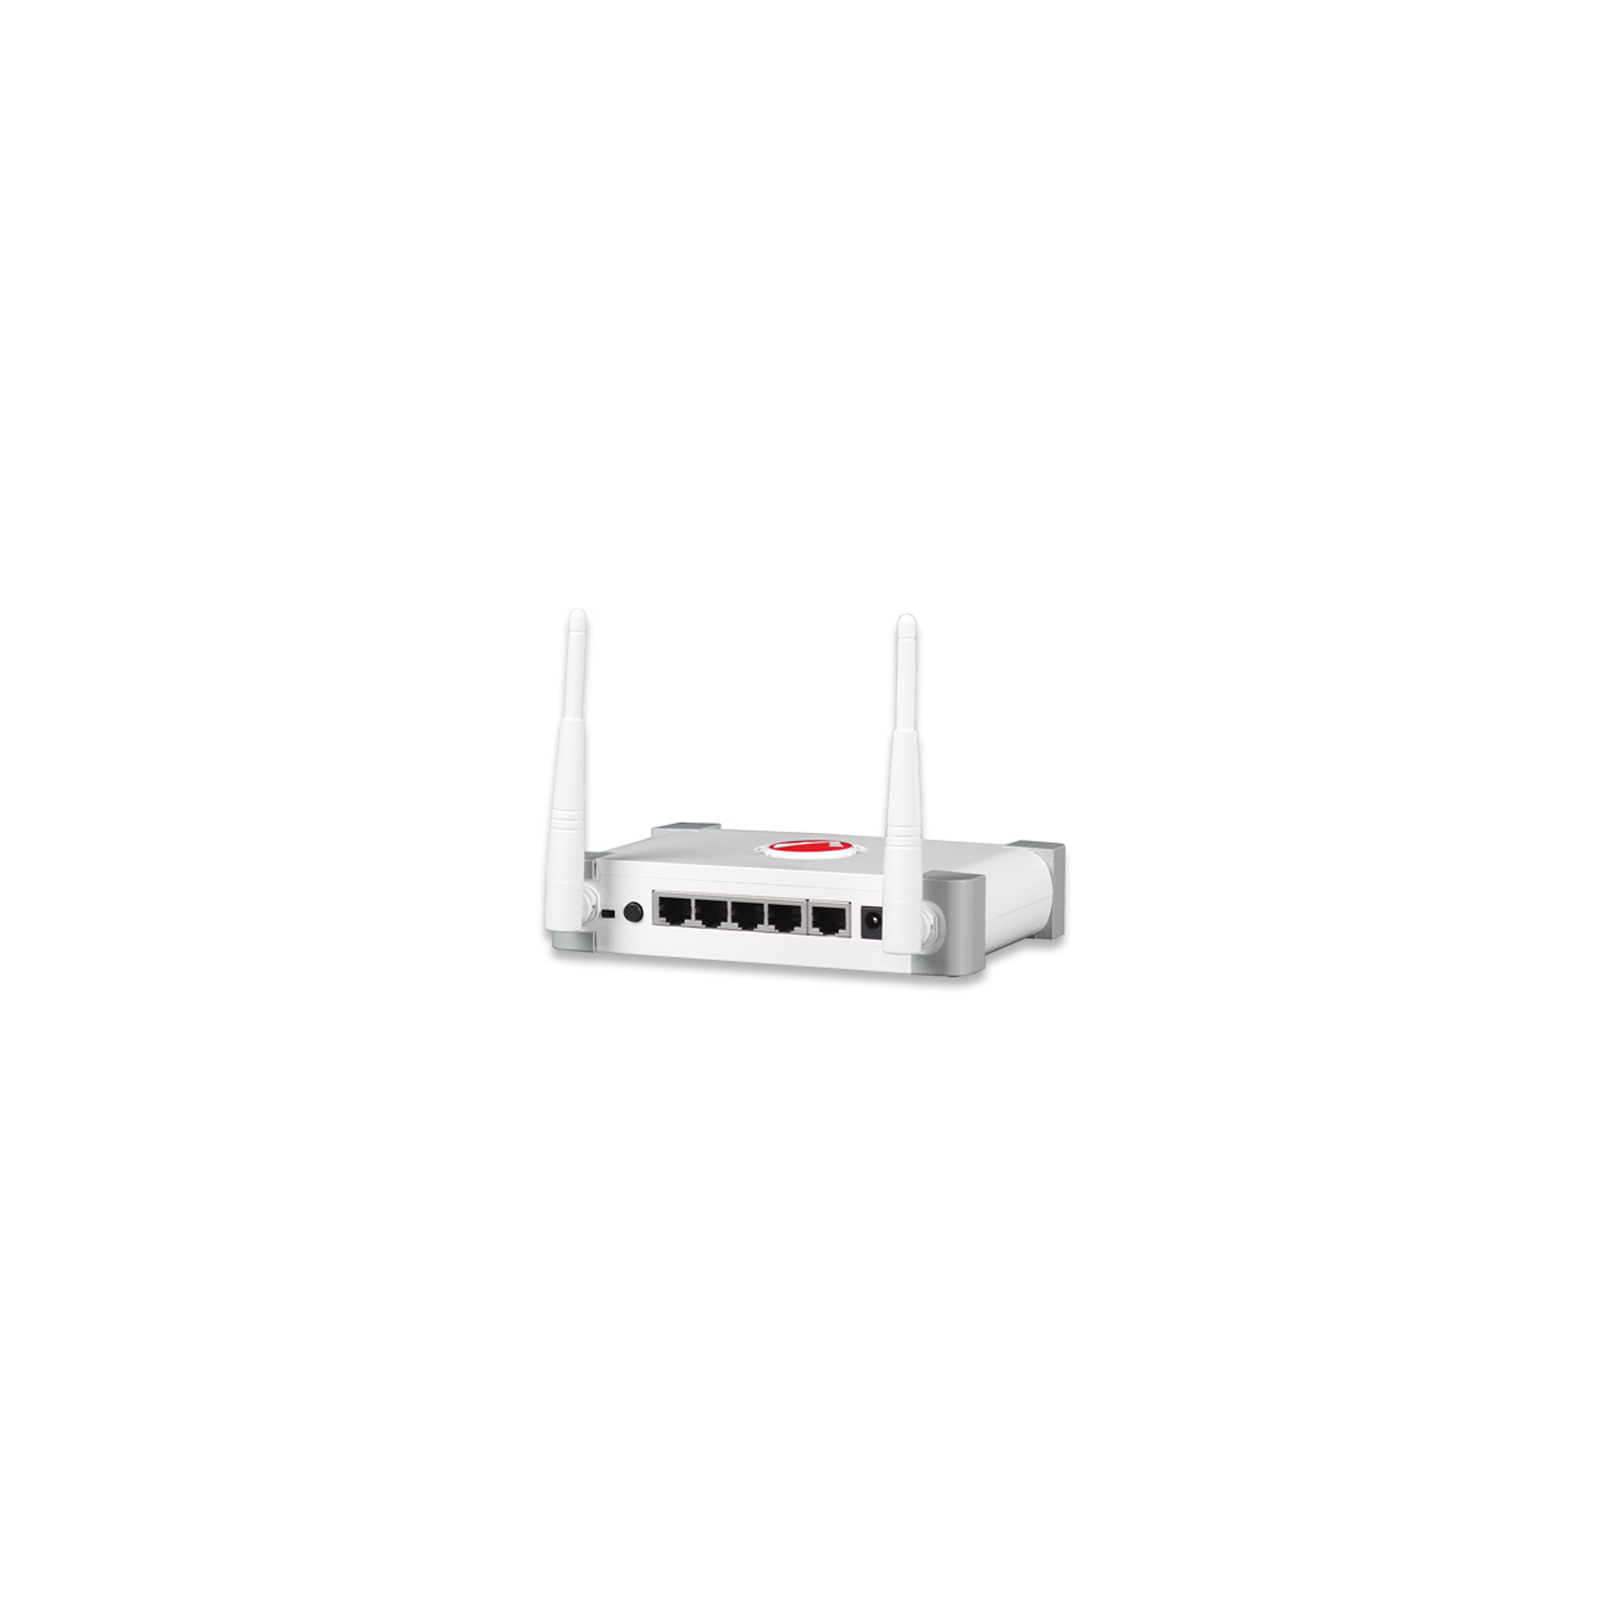 Маршрутизатор Intellinet 3G 4-Port Router MIMO 2T2R изображение 6